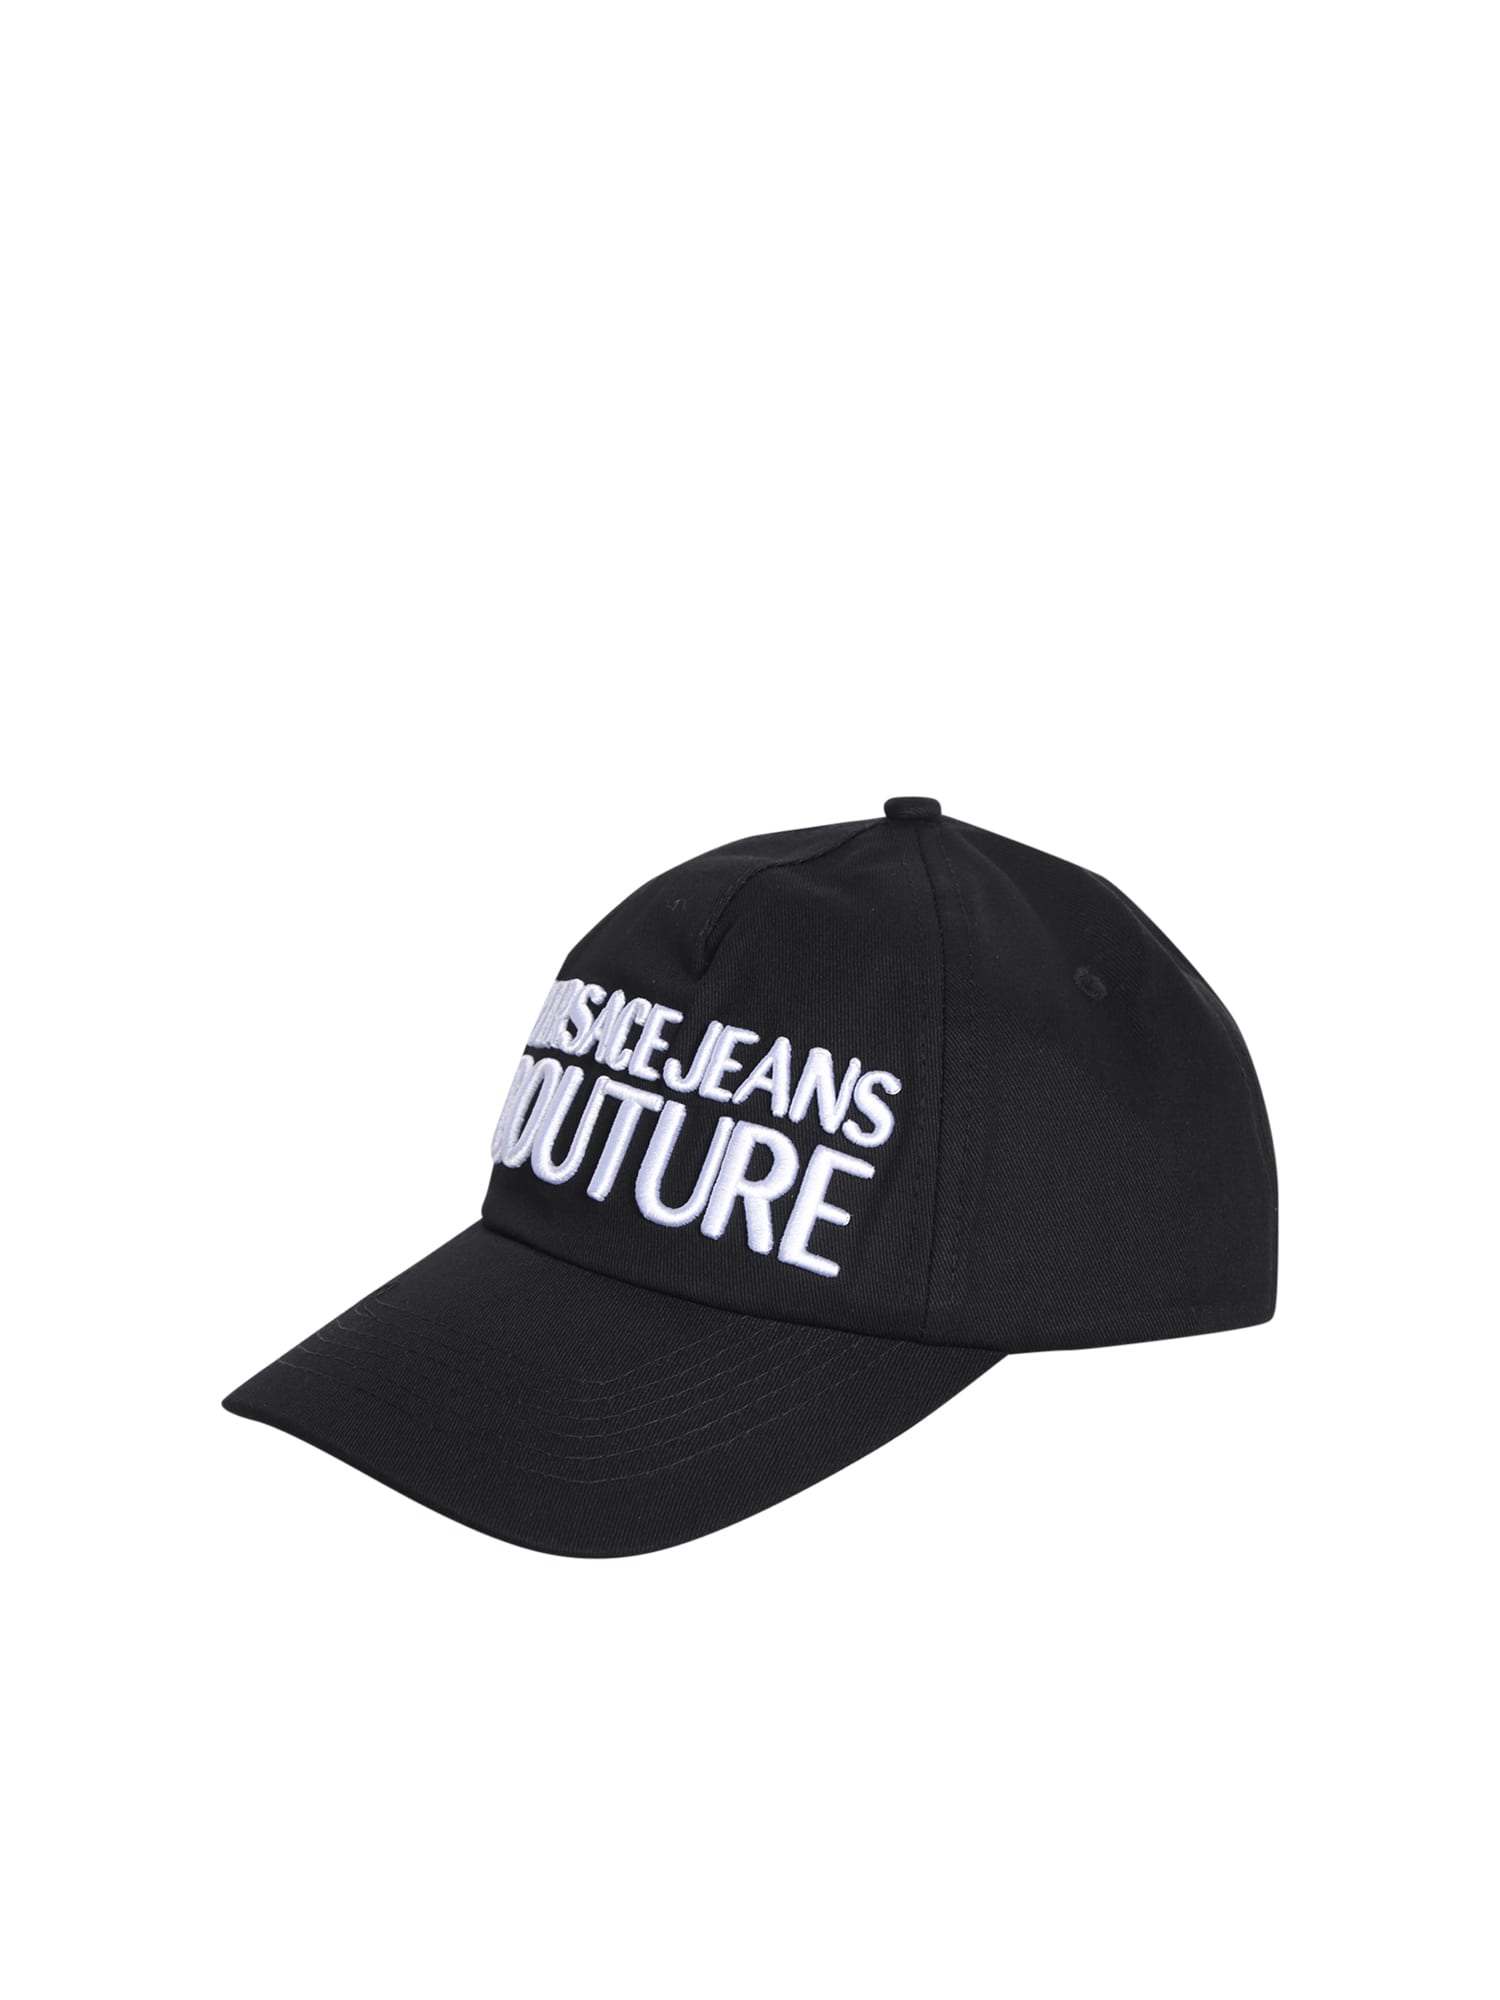 Versace Jeans Couture Black Baseball Cap By